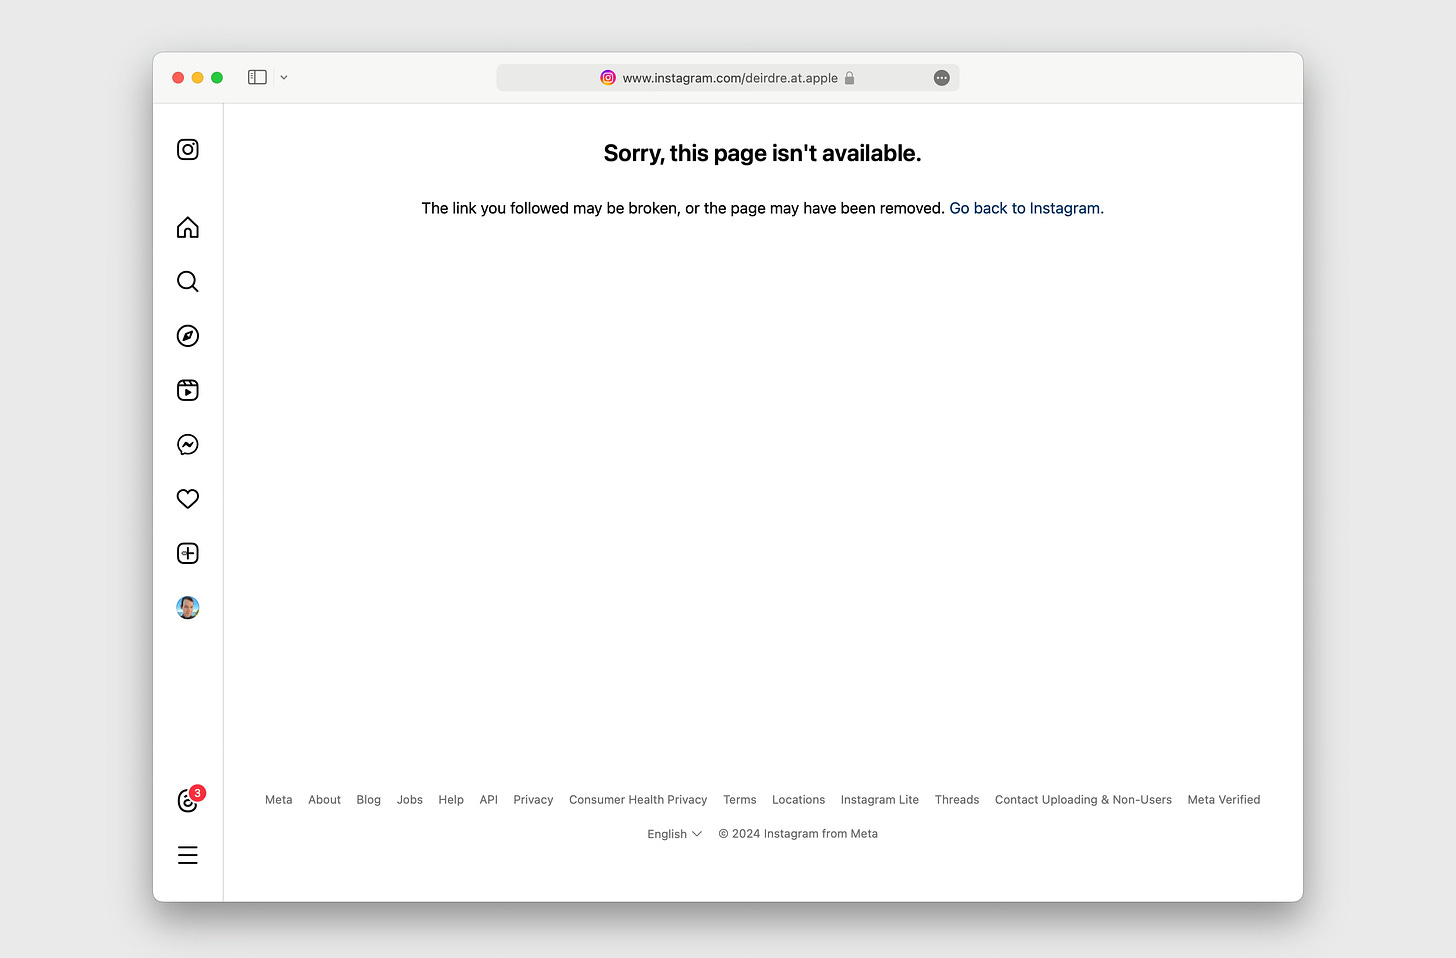 A screenshot of Safari on macOS. The active tab is the Instagram profile page for deirdre.at.apple. The page says, "Sorry this page isn't available."